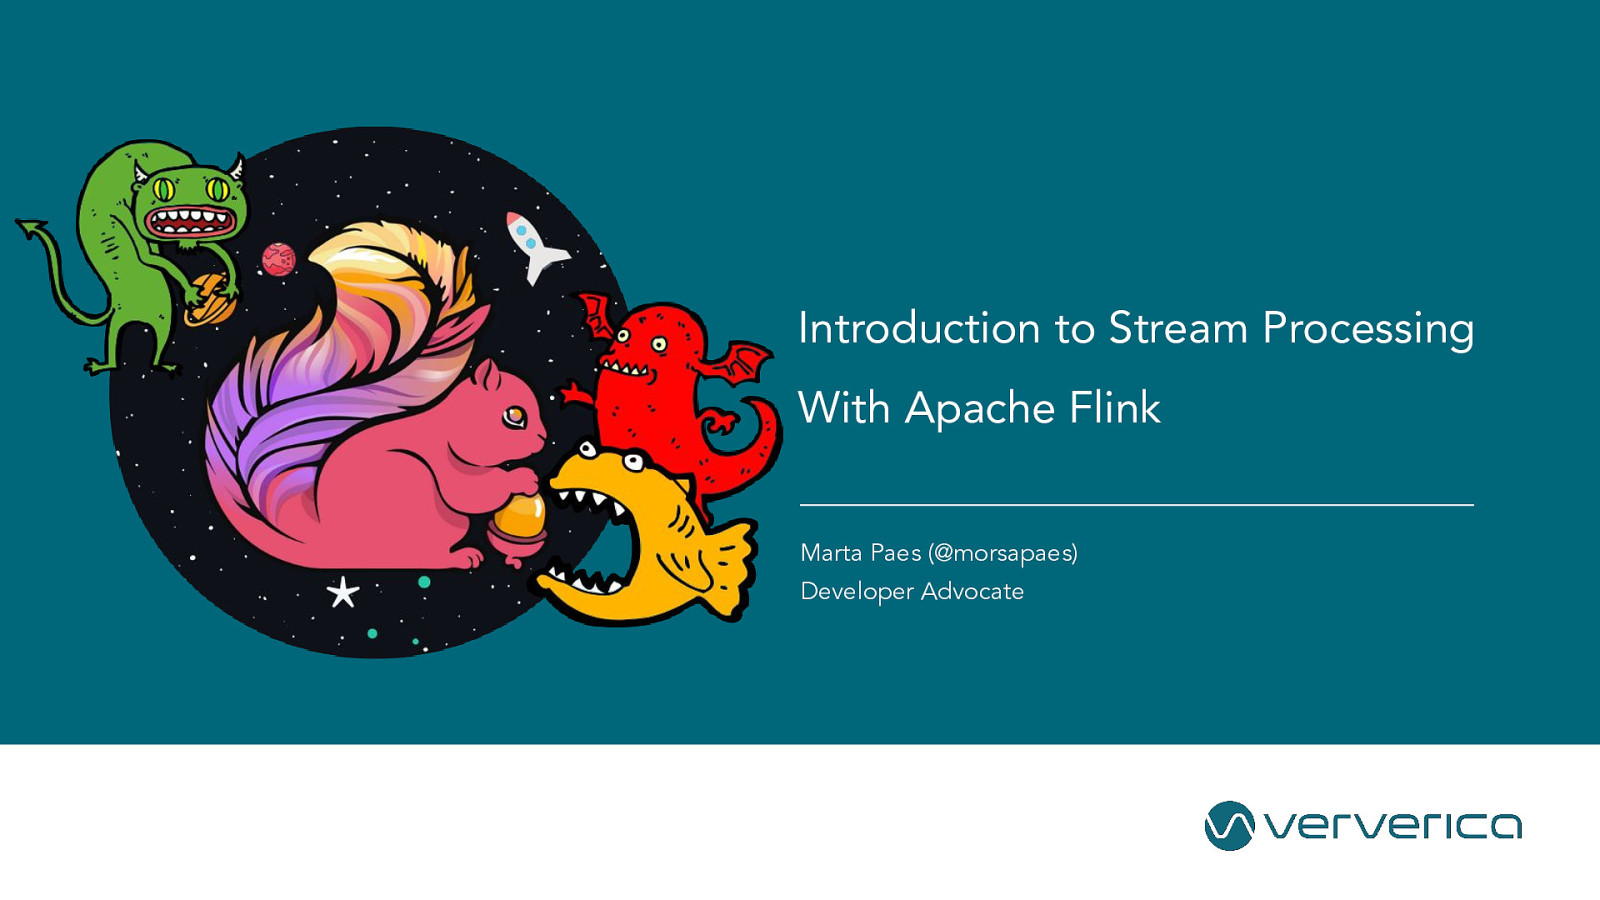 Introduction to Stream Processing with Apache Flink